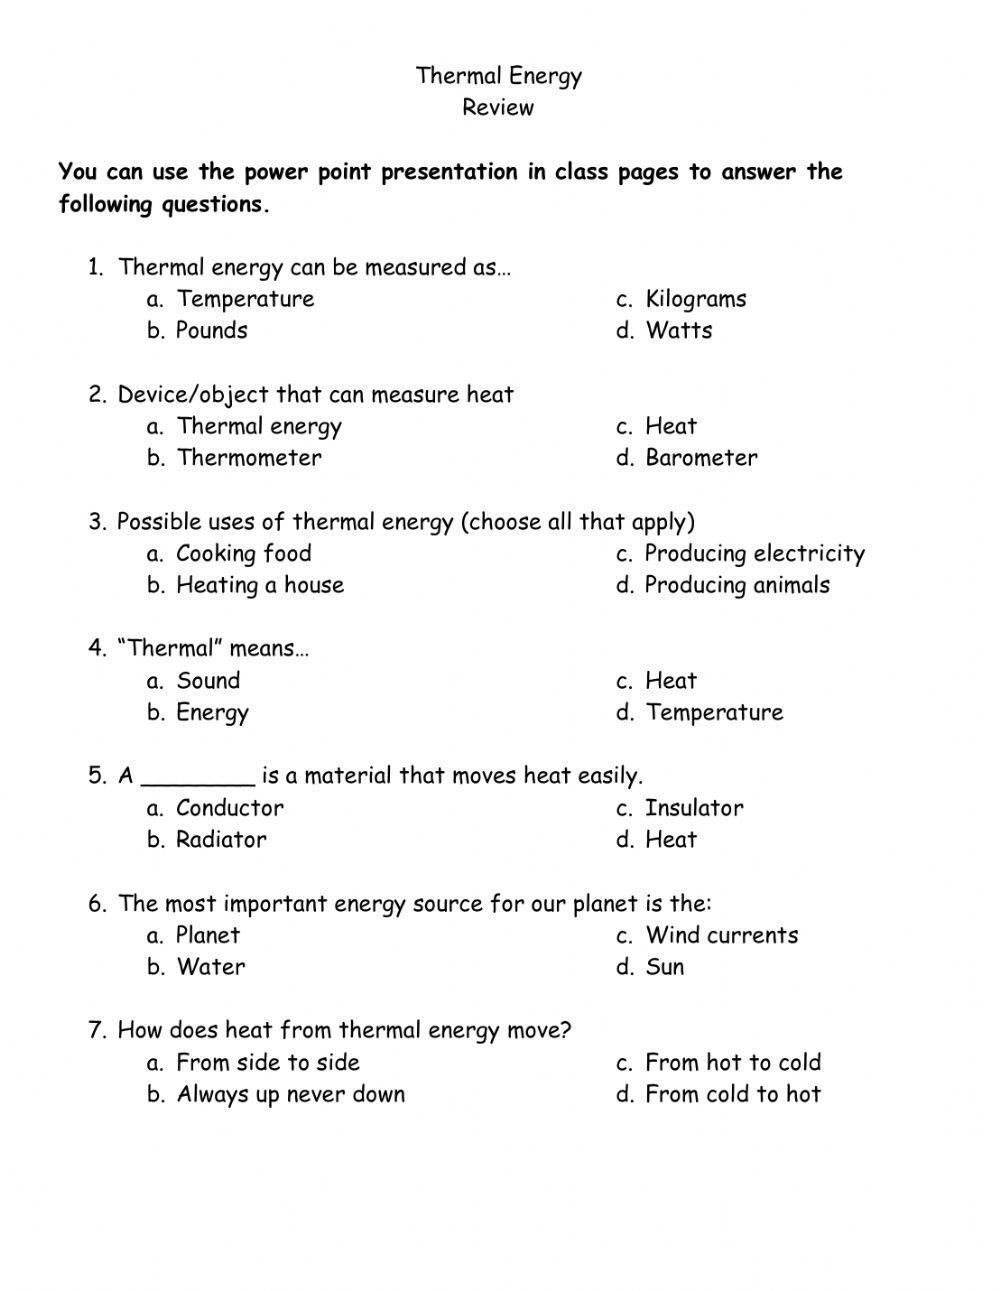 Thermal Energy Review